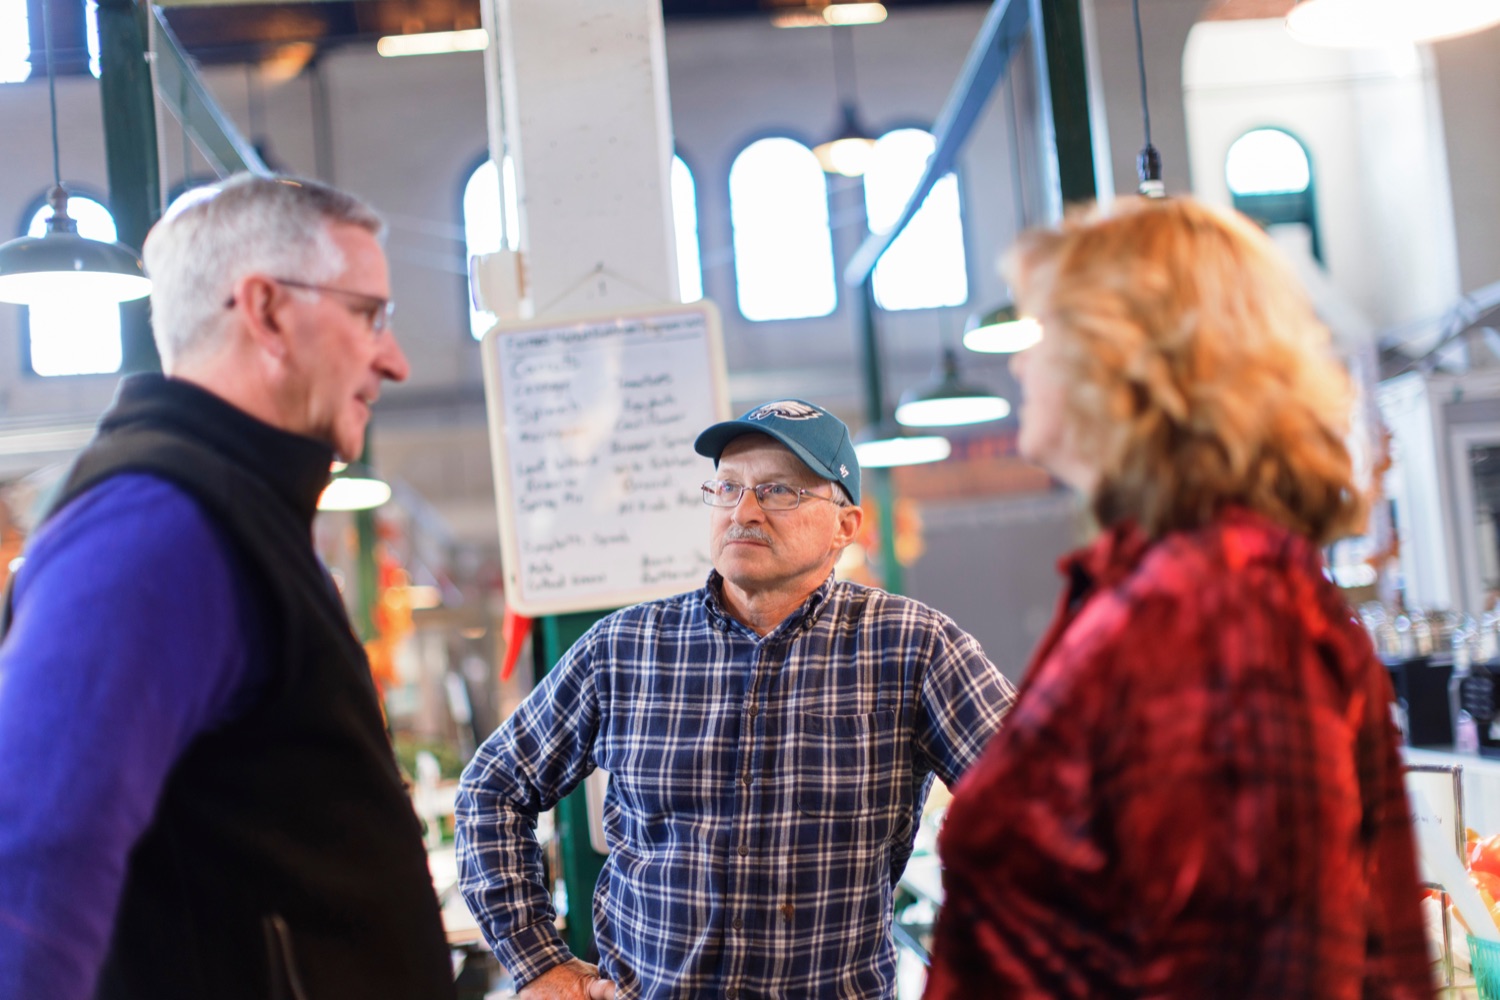 Agriculture Secretary Russell Redding, left, talks with Dennis Fritz and his wife, Barb, inside York Central Market House on Thursday, November 17, 2022.<br><a href="https://filesource.amperwave.net/commonwealthofpa/photo/22347_AG_Thanksgiving_Shopping_NK_010.JPG" target="_blank">⇣ Download Photo</a>